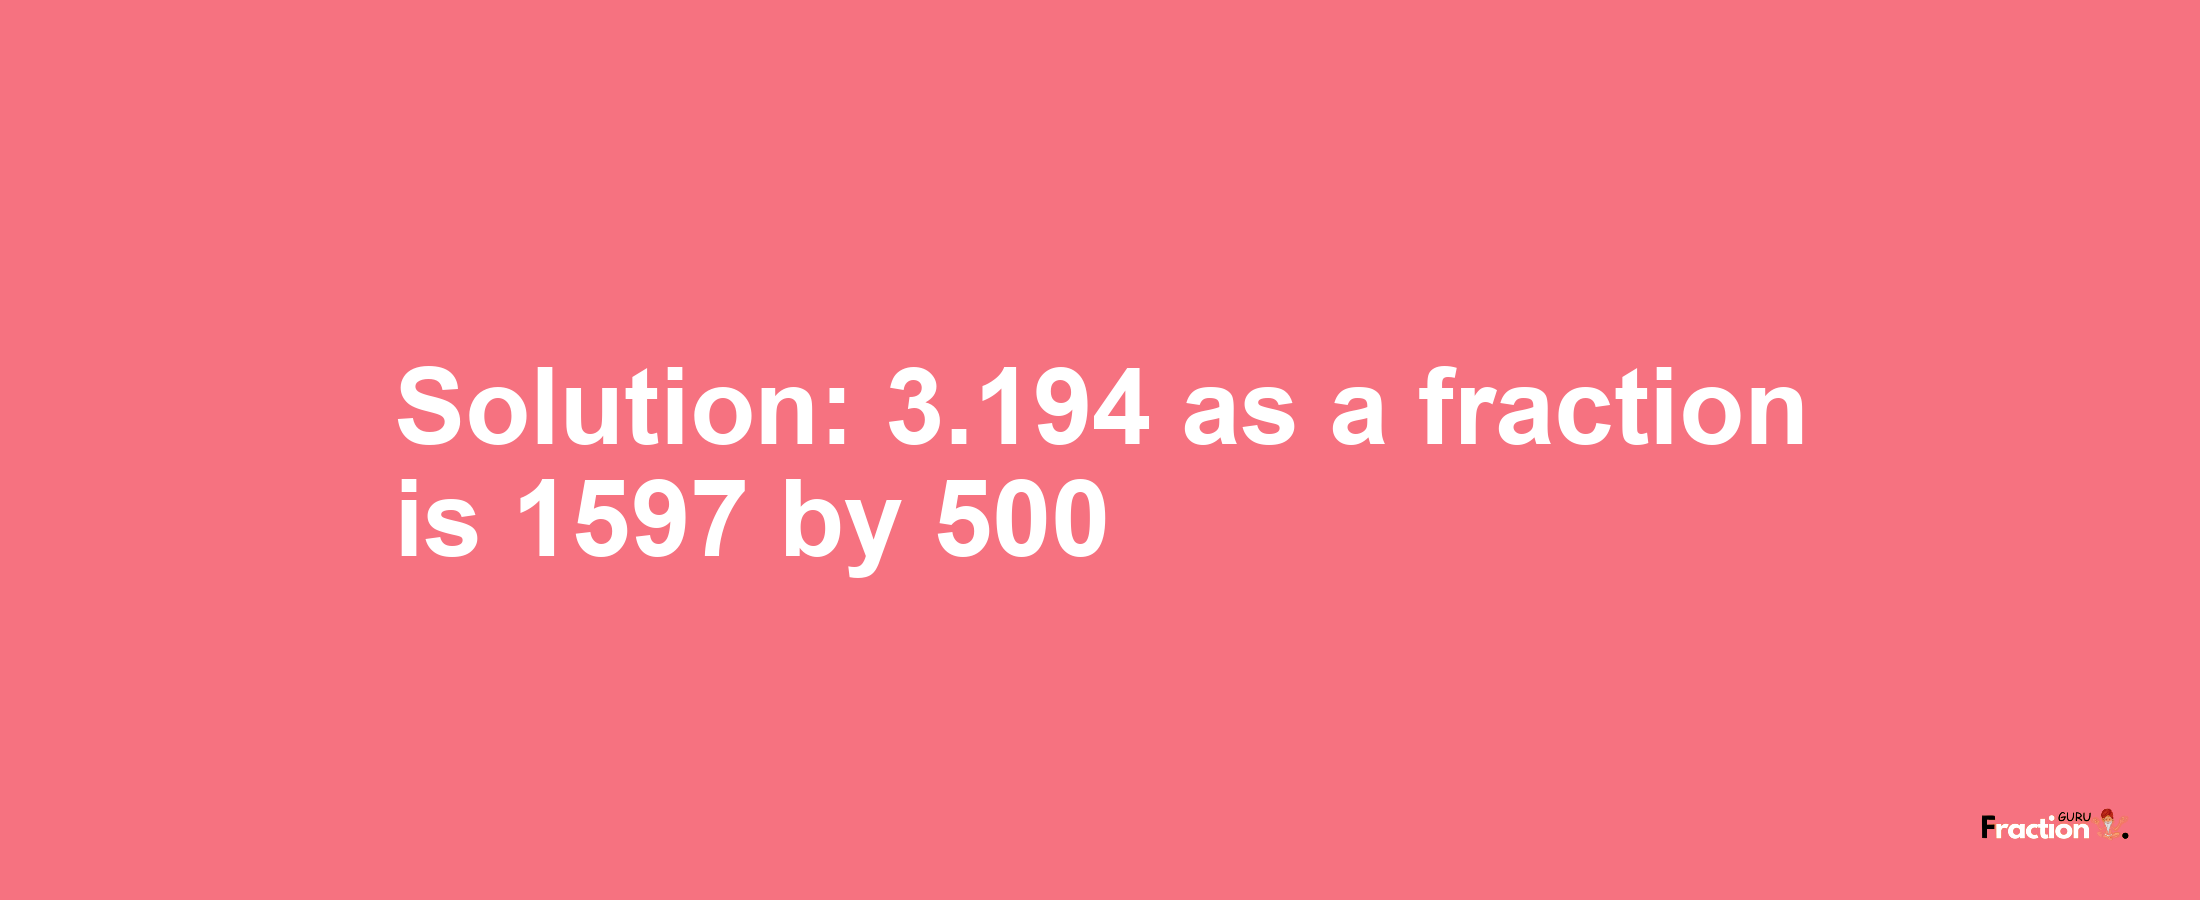 Solution:3.194 as a fraction is 1597/500